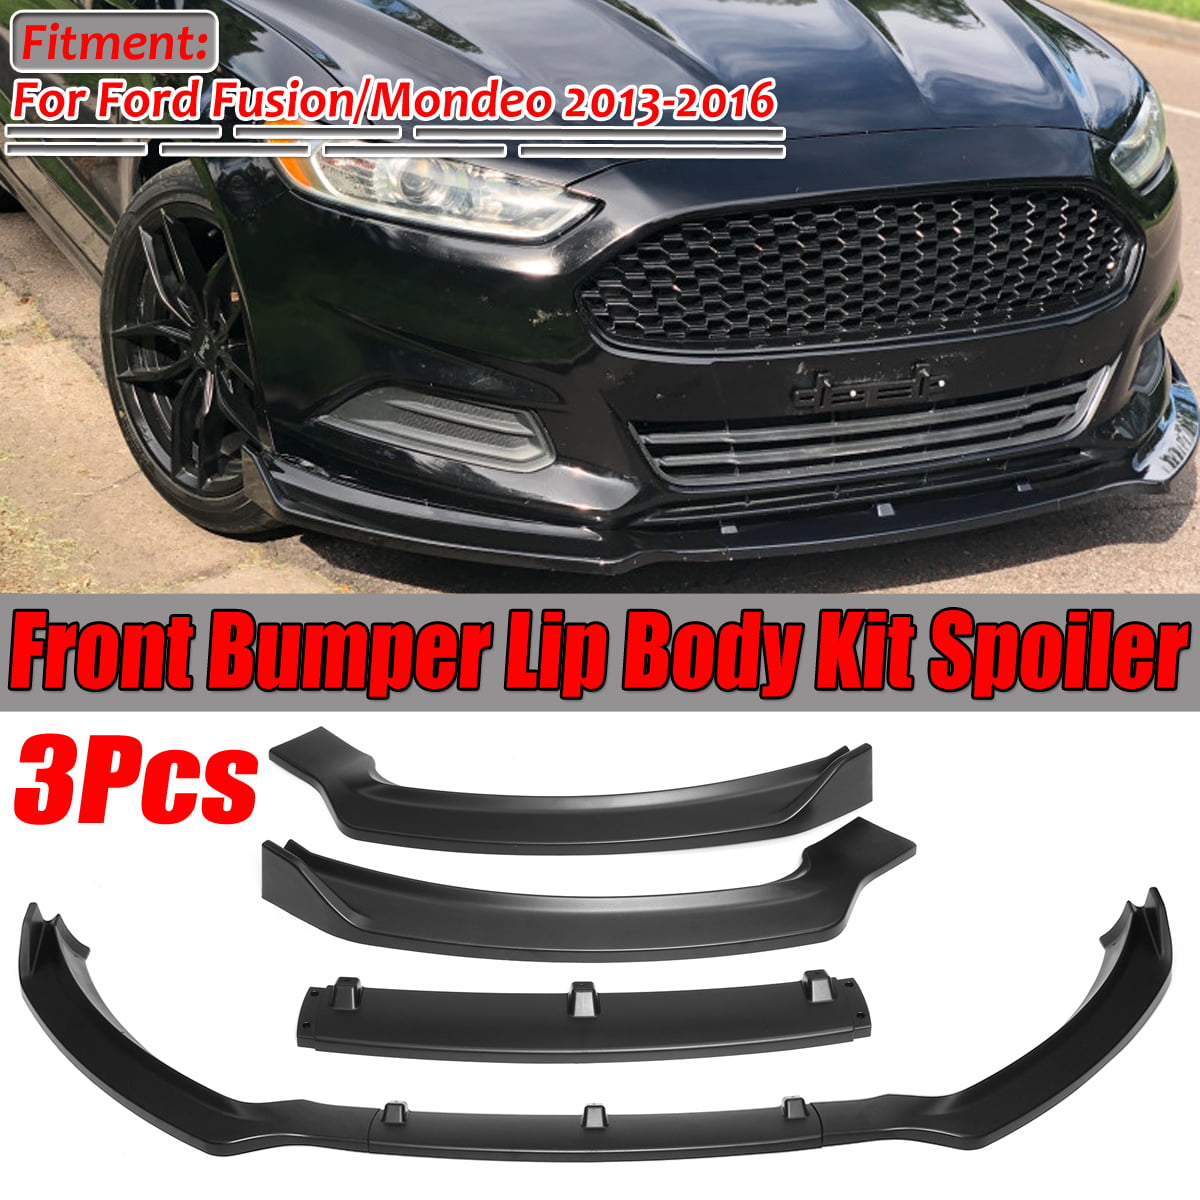 Stay Tuned Performance PU/569/PBK Painted Black Front Bumper Body Kit Lip 3PCS Compaitble with 2013-2016 Fusion/Mondeo 